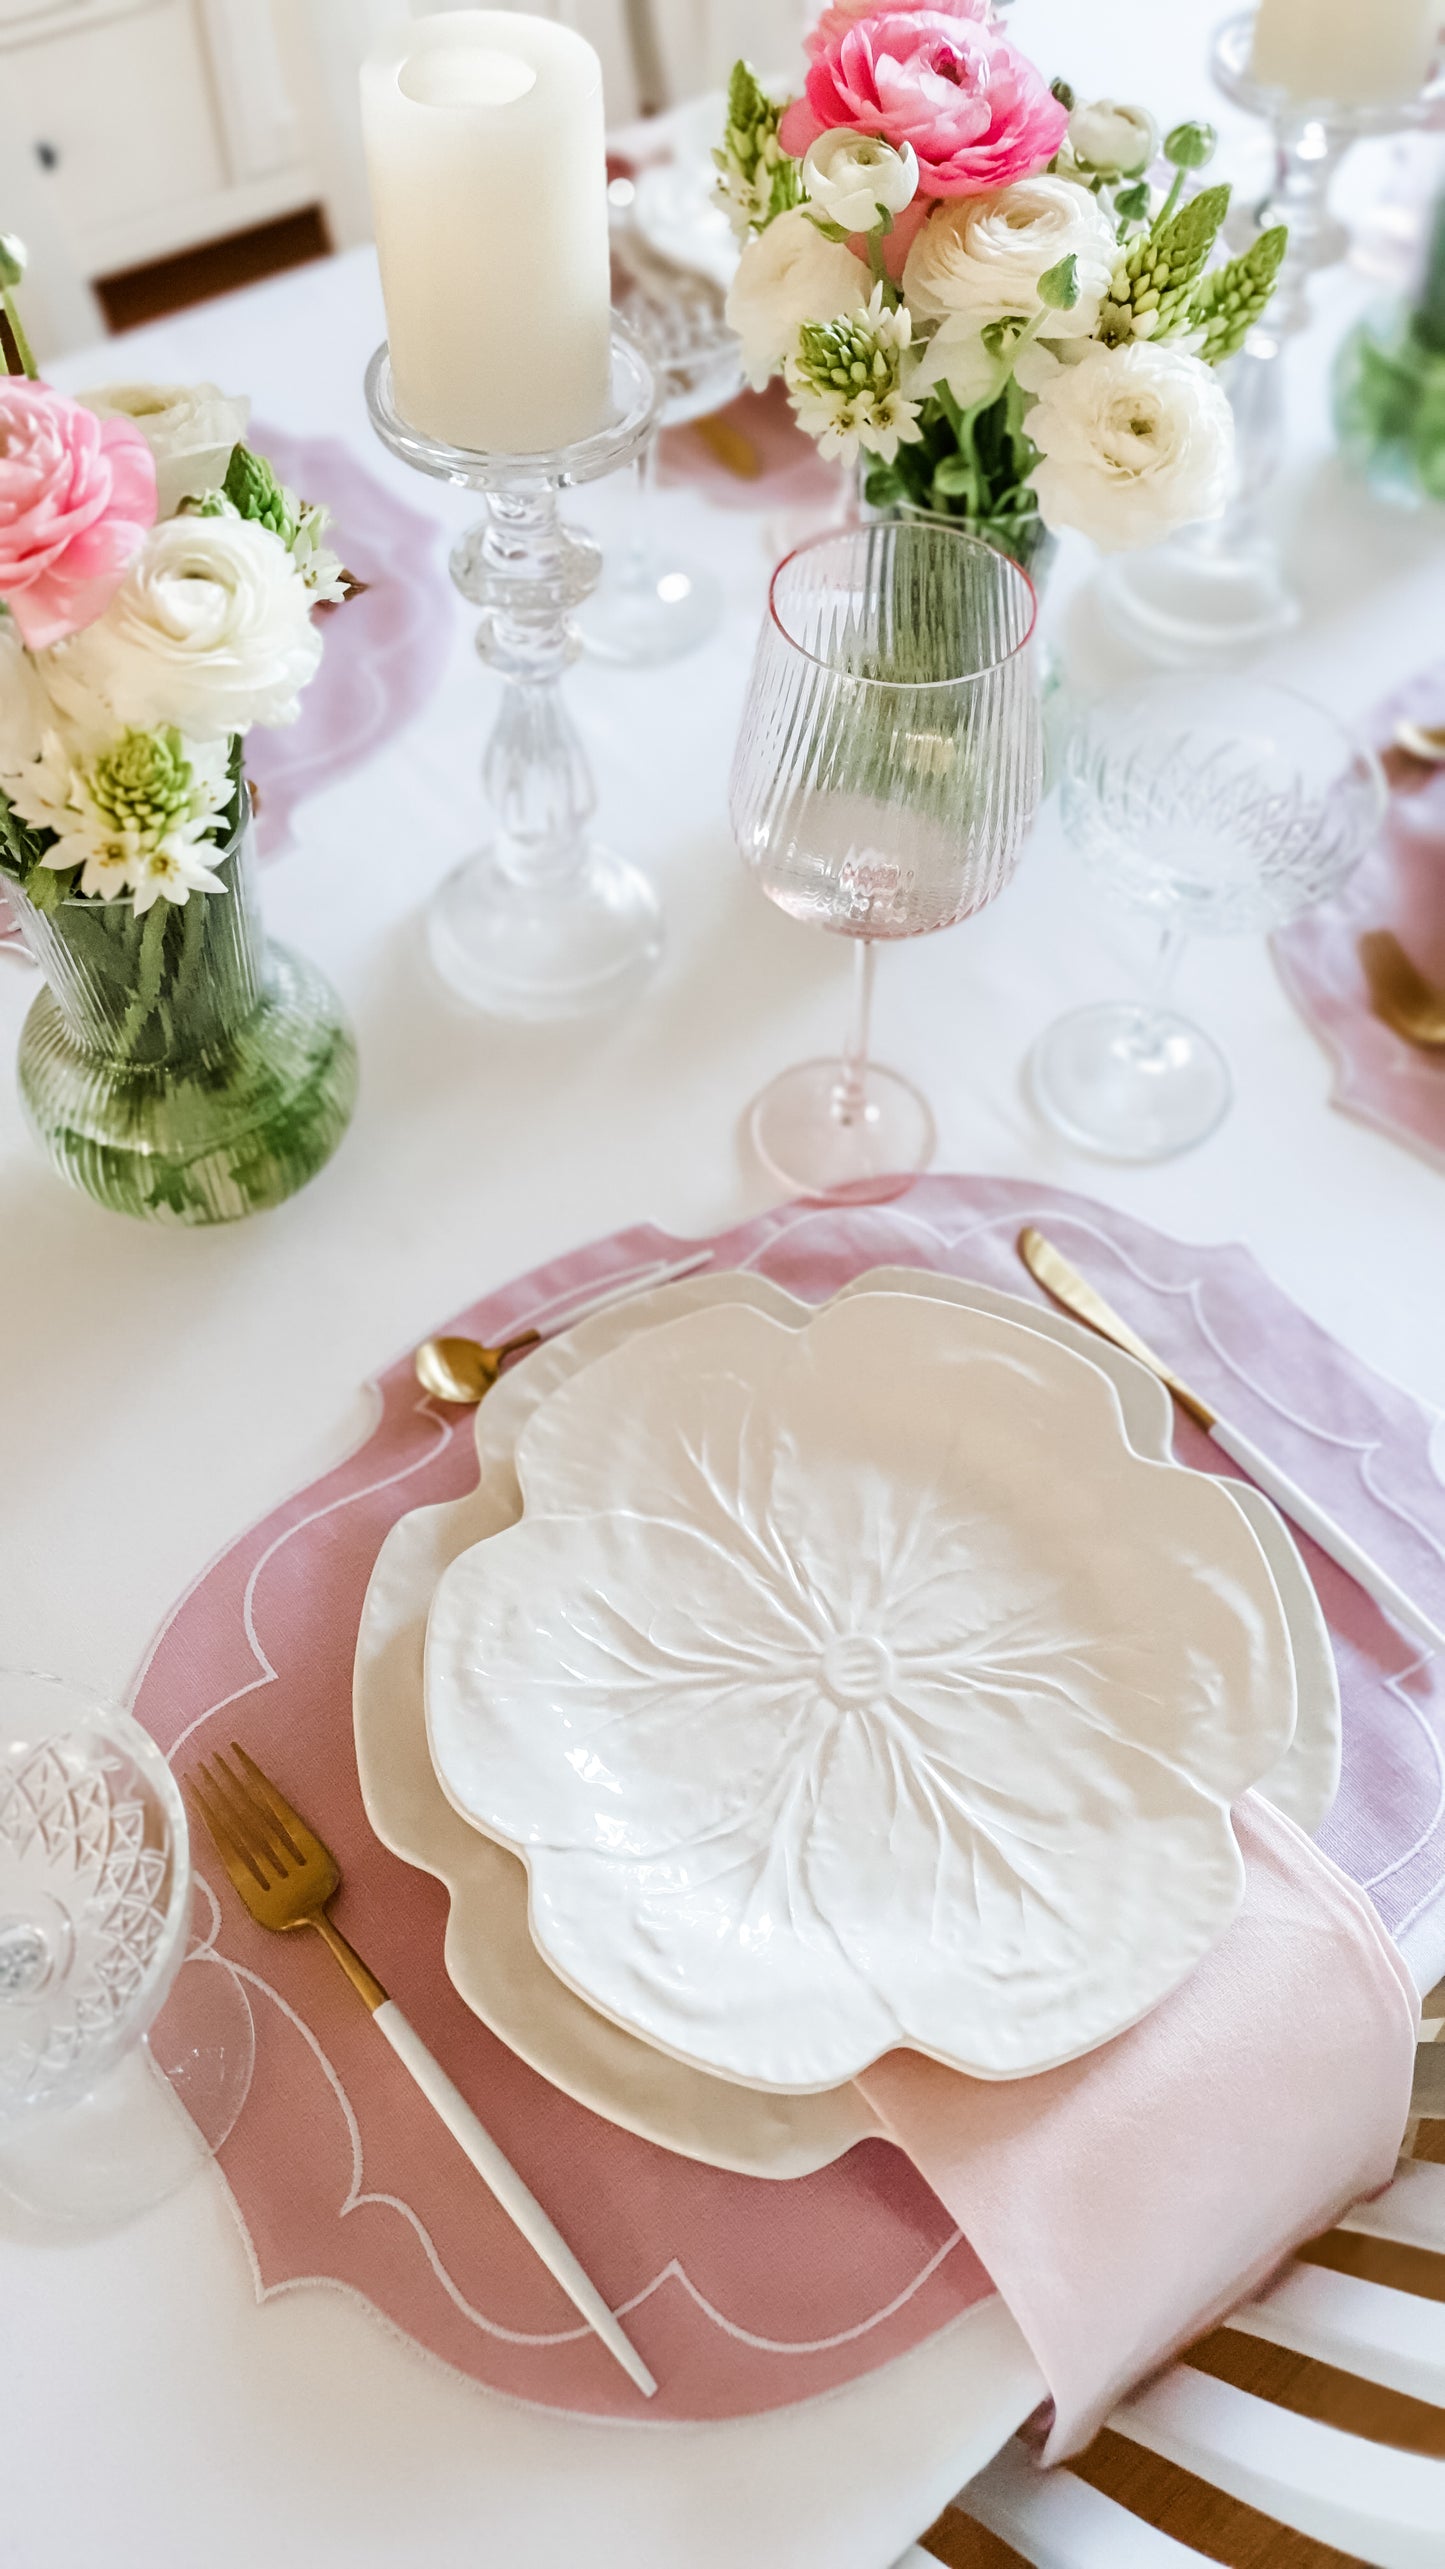 Della Placemat Pink